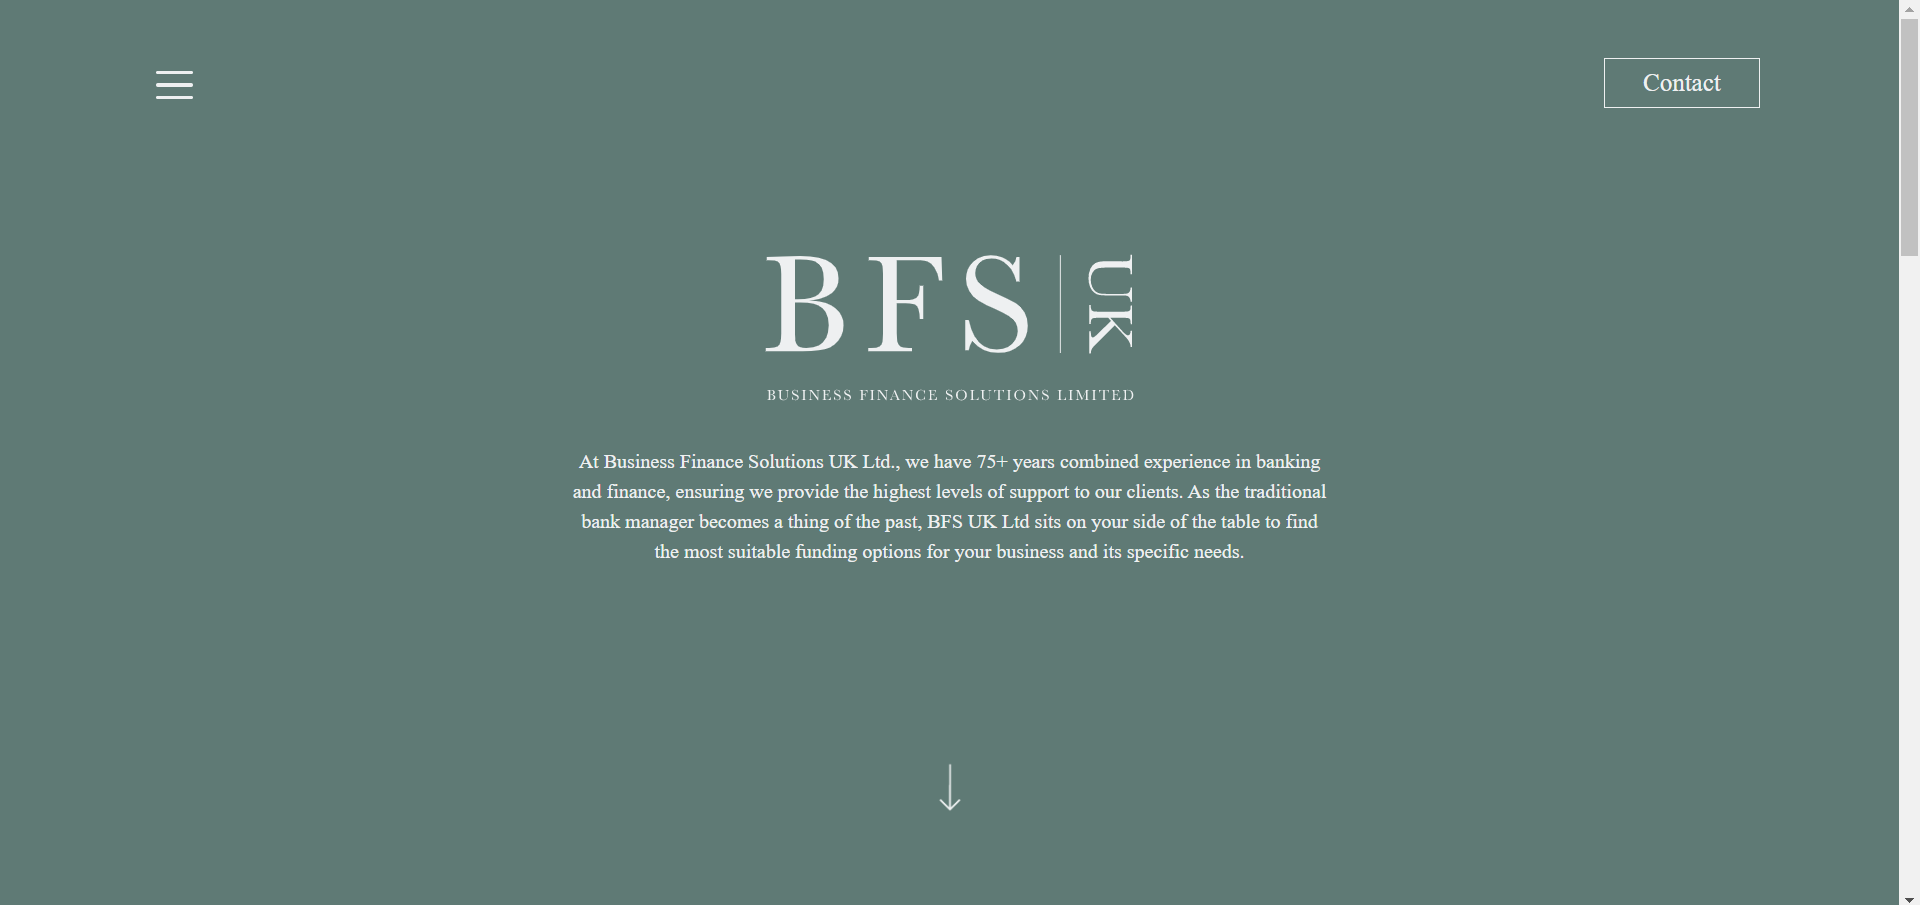 BFS - Business Finance Solutions			